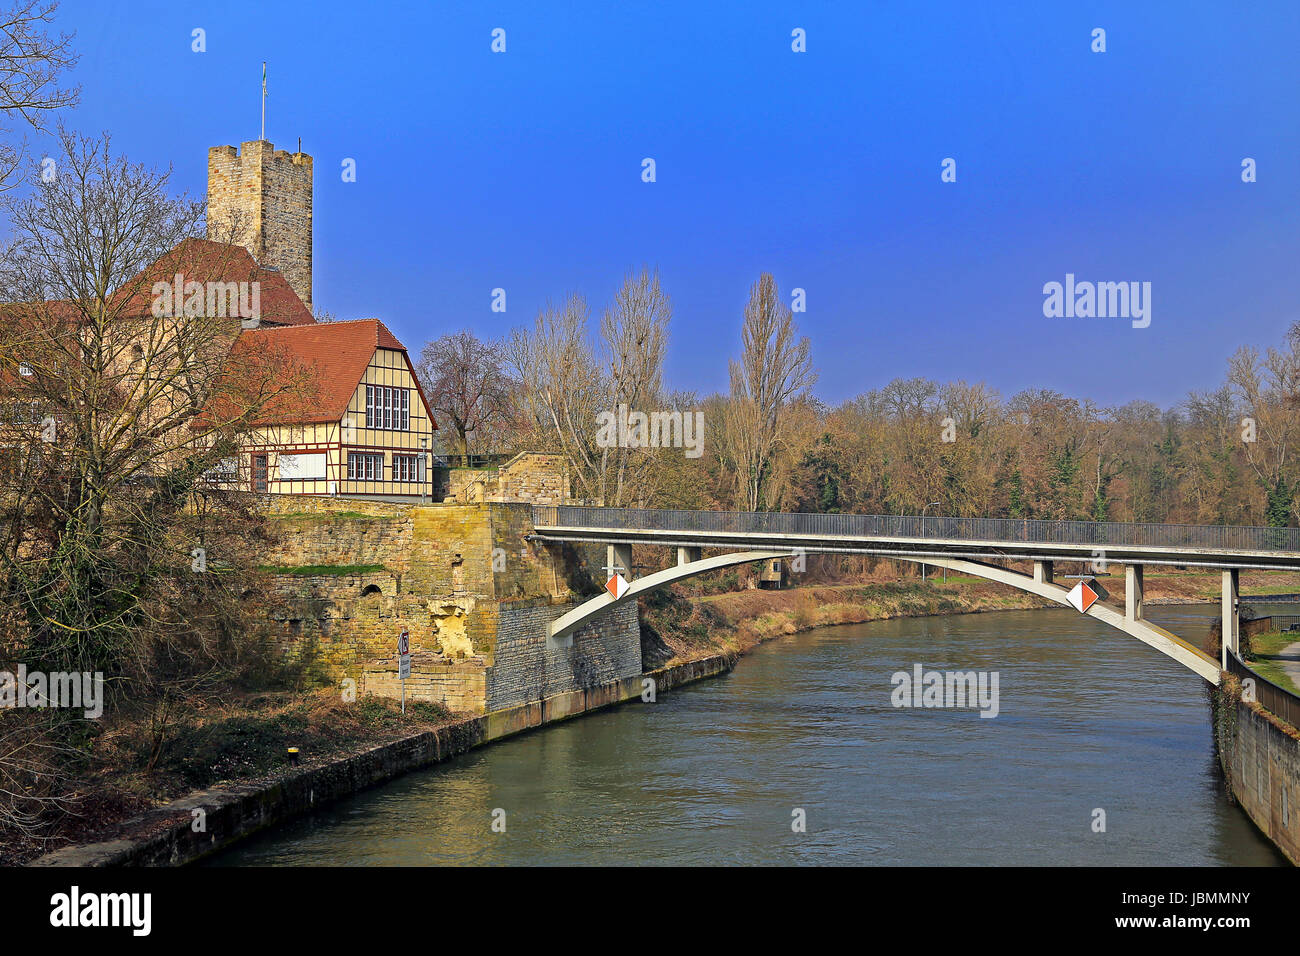 ancient castle with rathausbrücke in lauffen Stock Photo